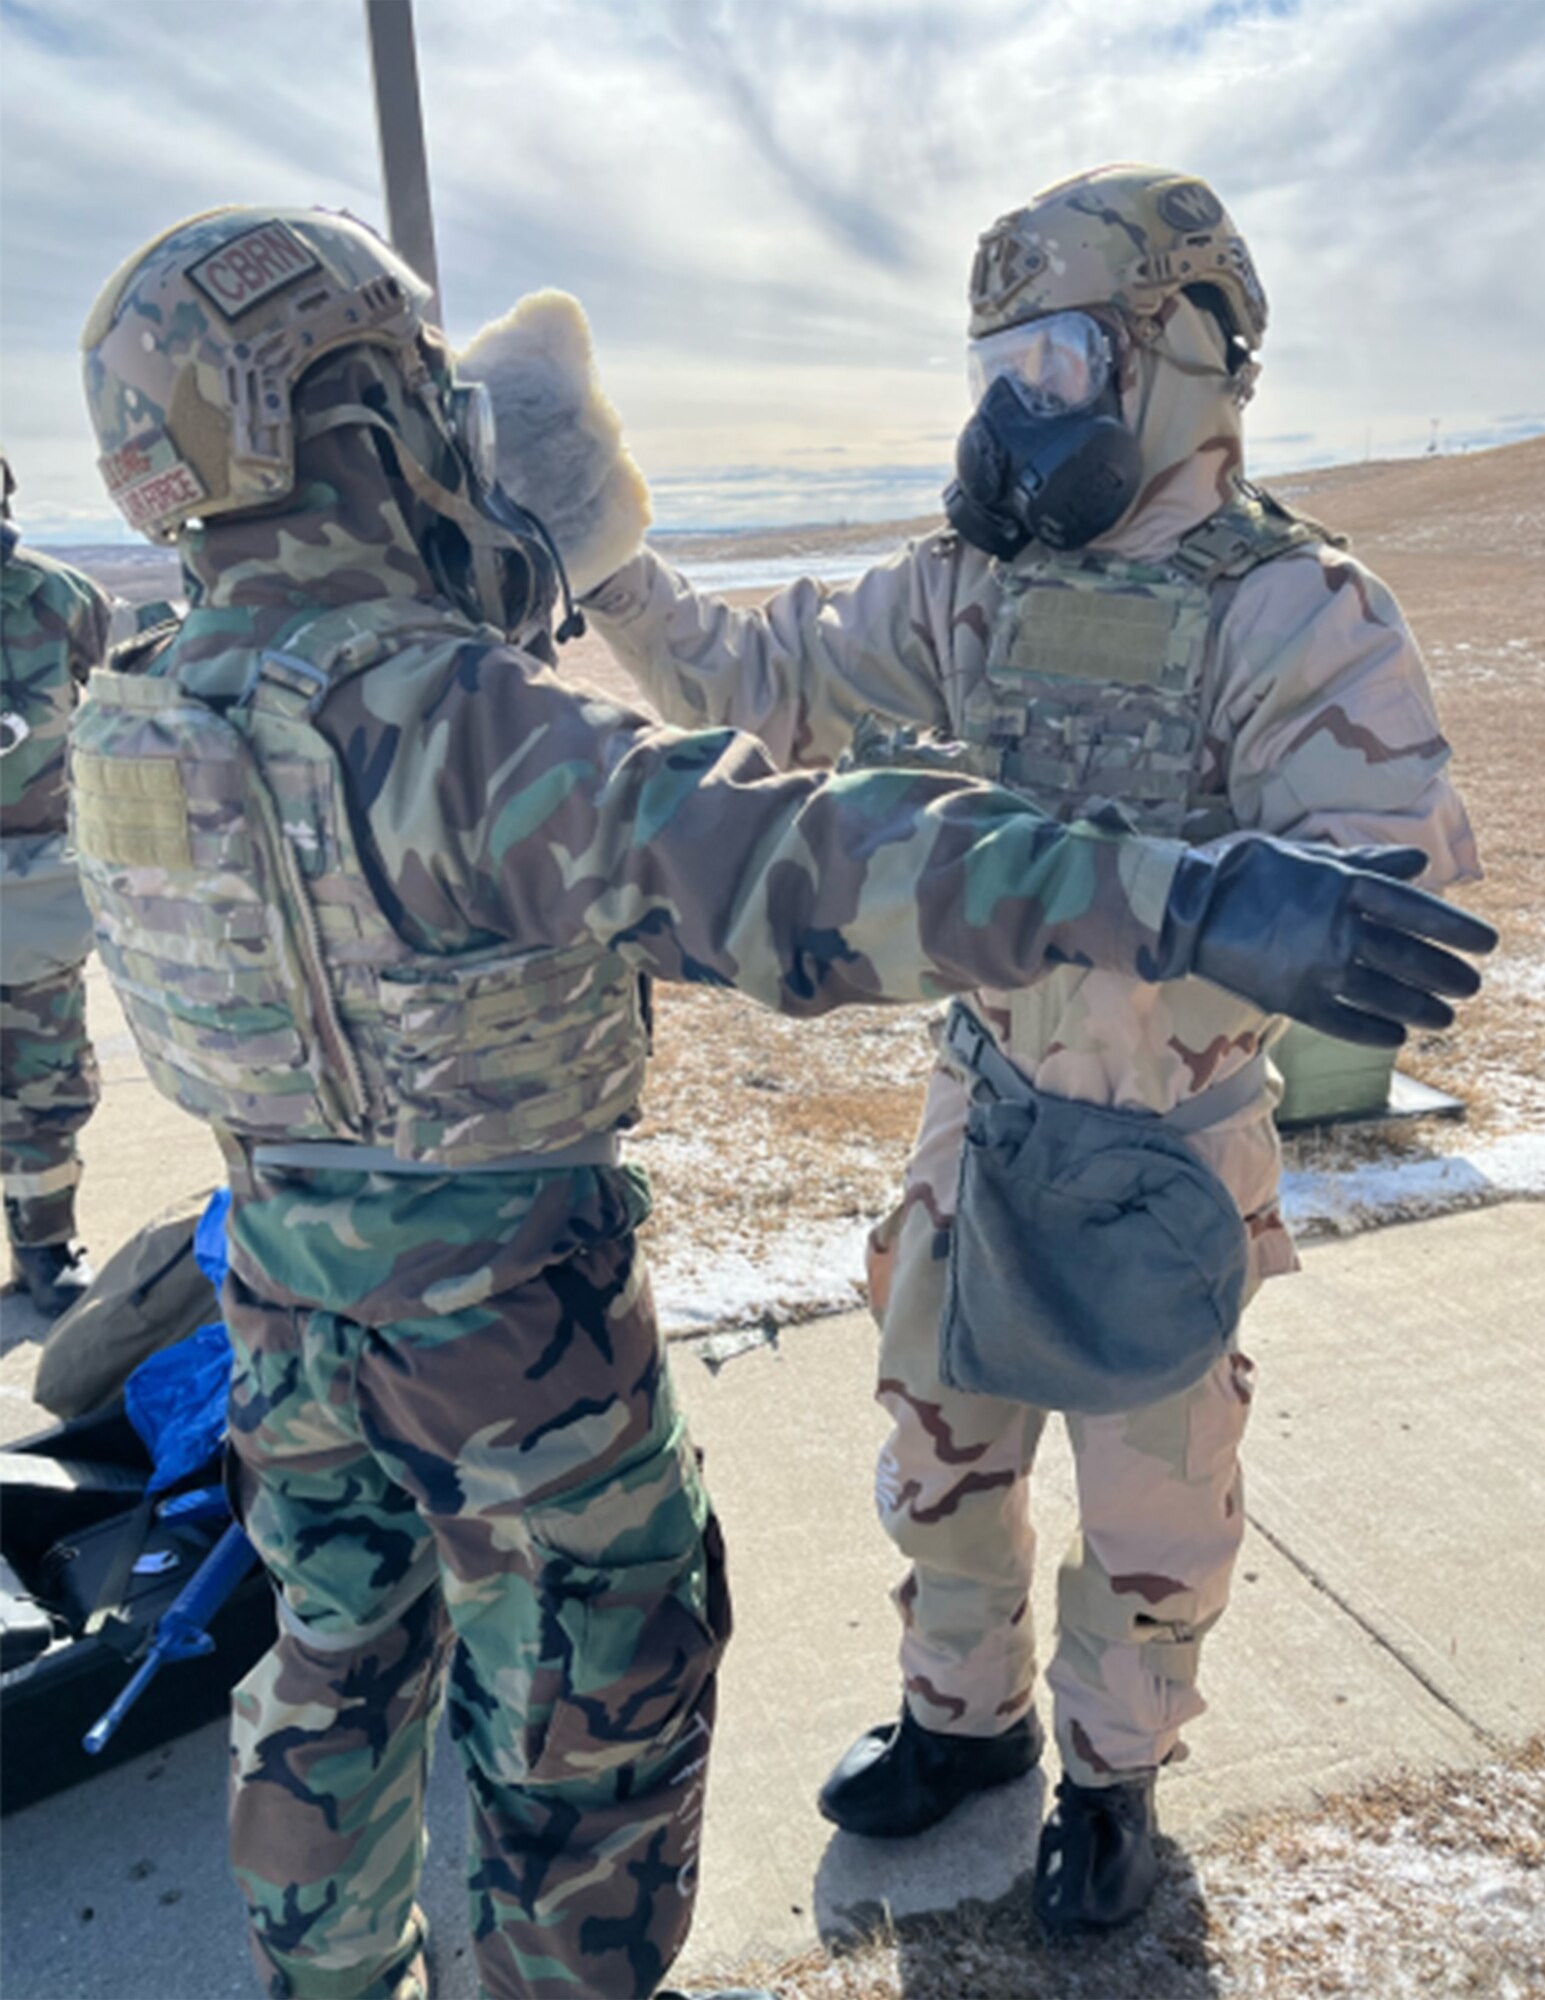 U.S. Air Force Senior Airman Gage Aleong and U.S. Air Force Airman 1st Class Michael Anundson, both from the 341st Missile Wing, perform decontamination operations with an M100 Decontamination Kit at Camp Grafton South, N.D., Feb. 14, 2024.